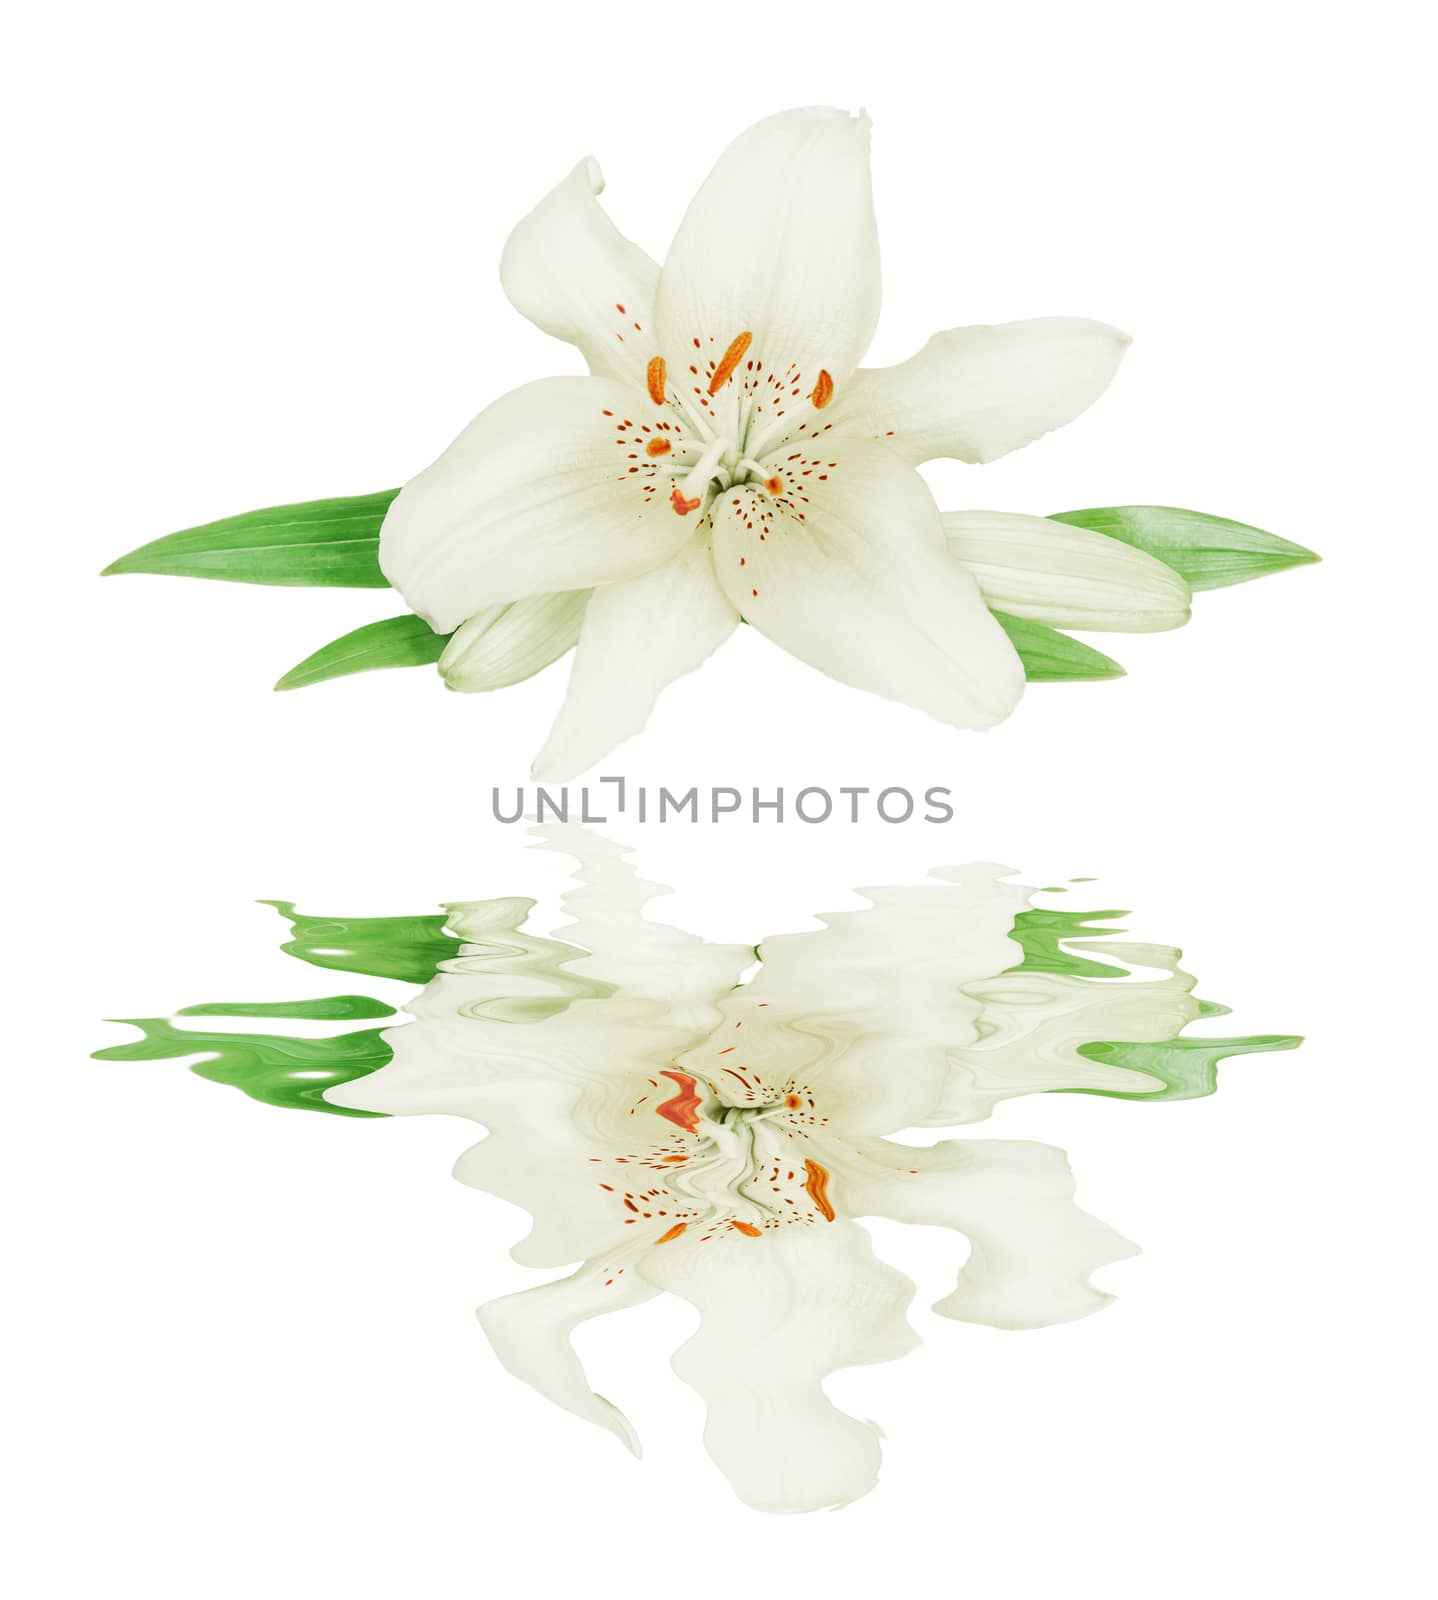 One flowers of white Lily close up, isolated on a white background, reflected in a water surface with small waves